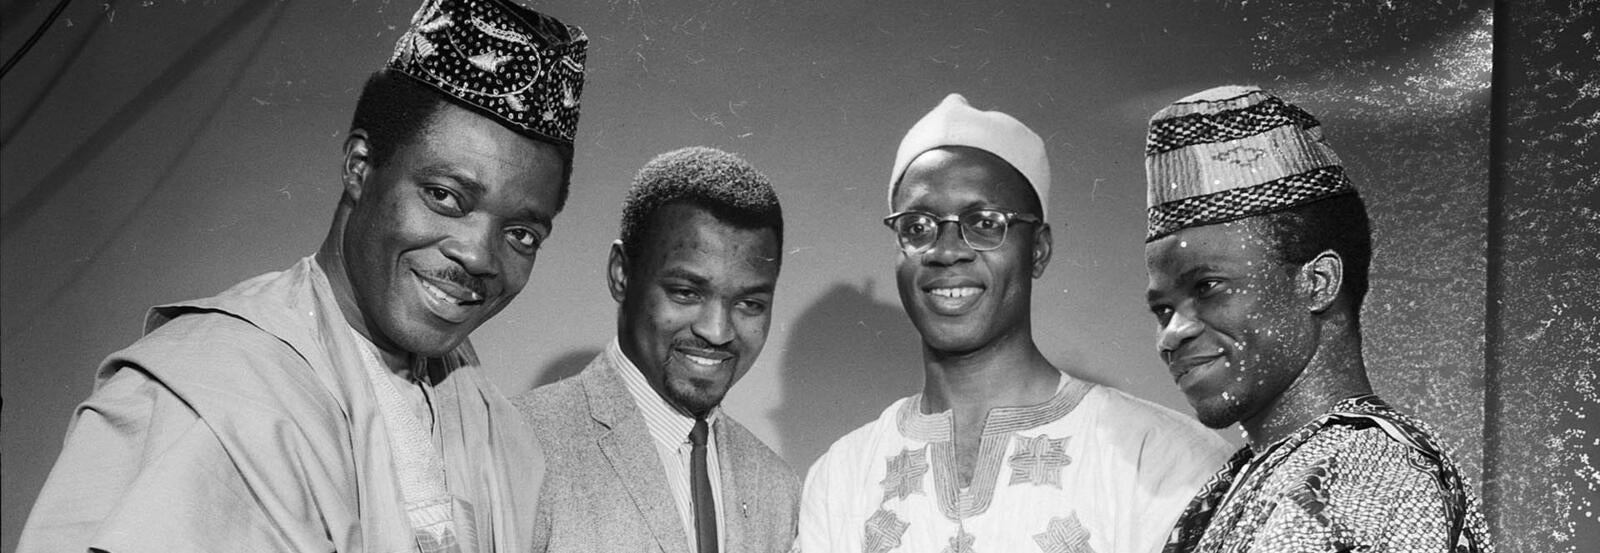 An archival photo of four Black students from Africa in cultural dress